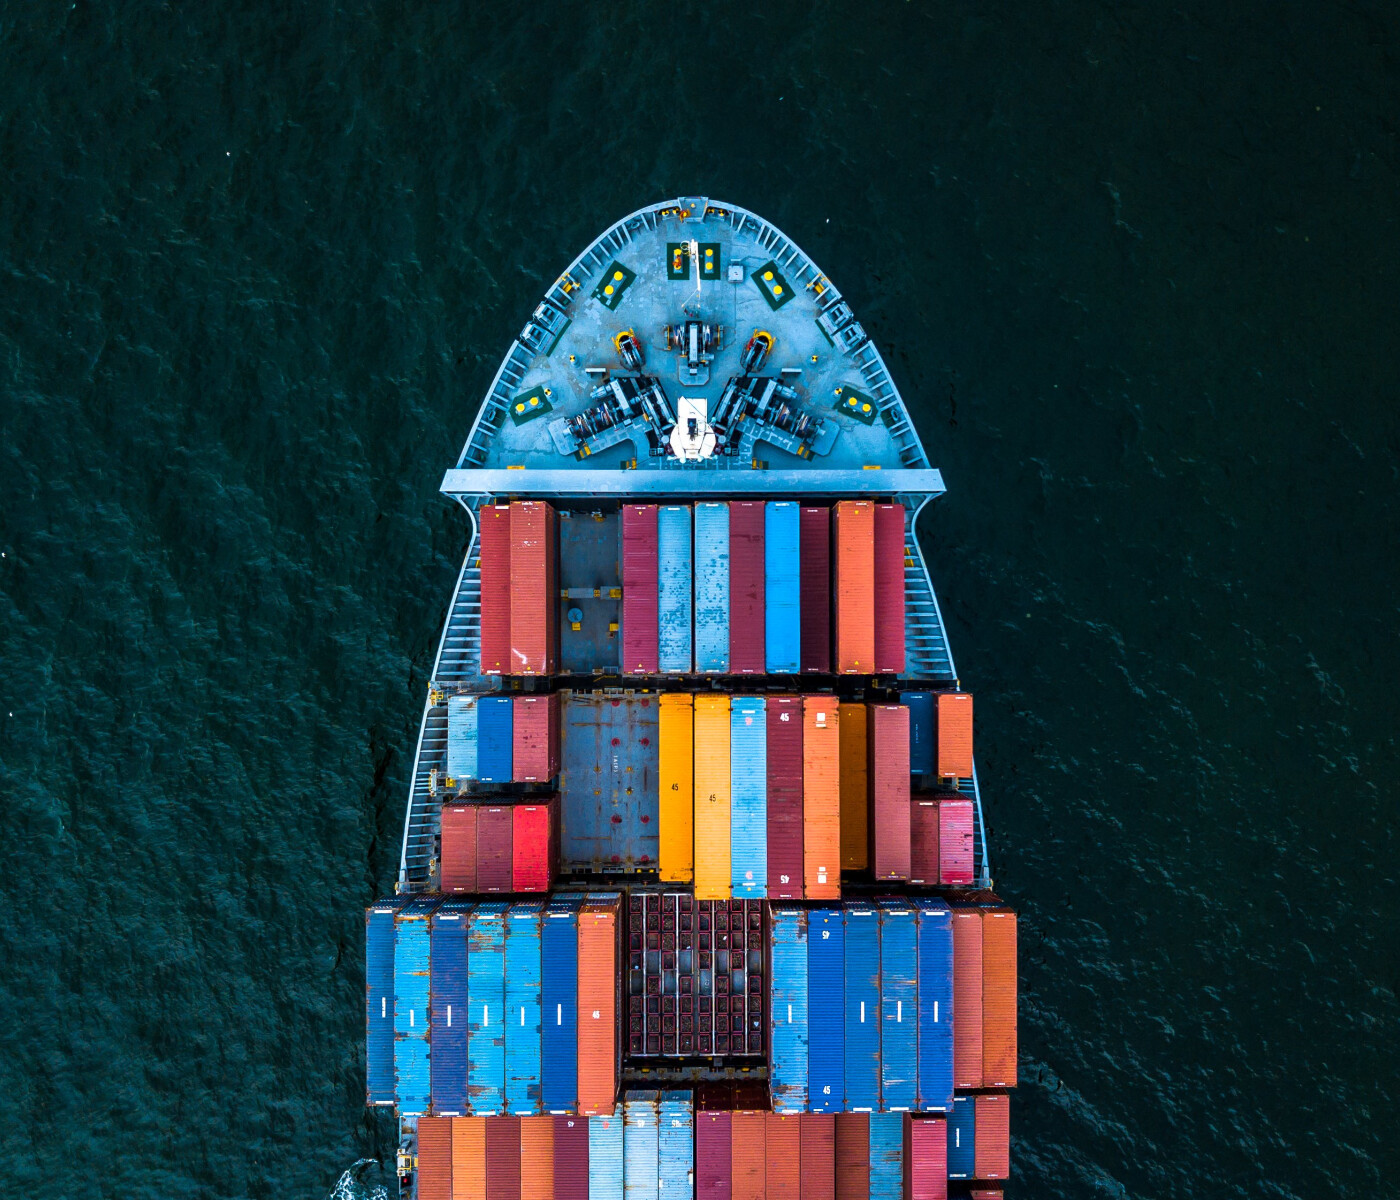 Containers on a container ship